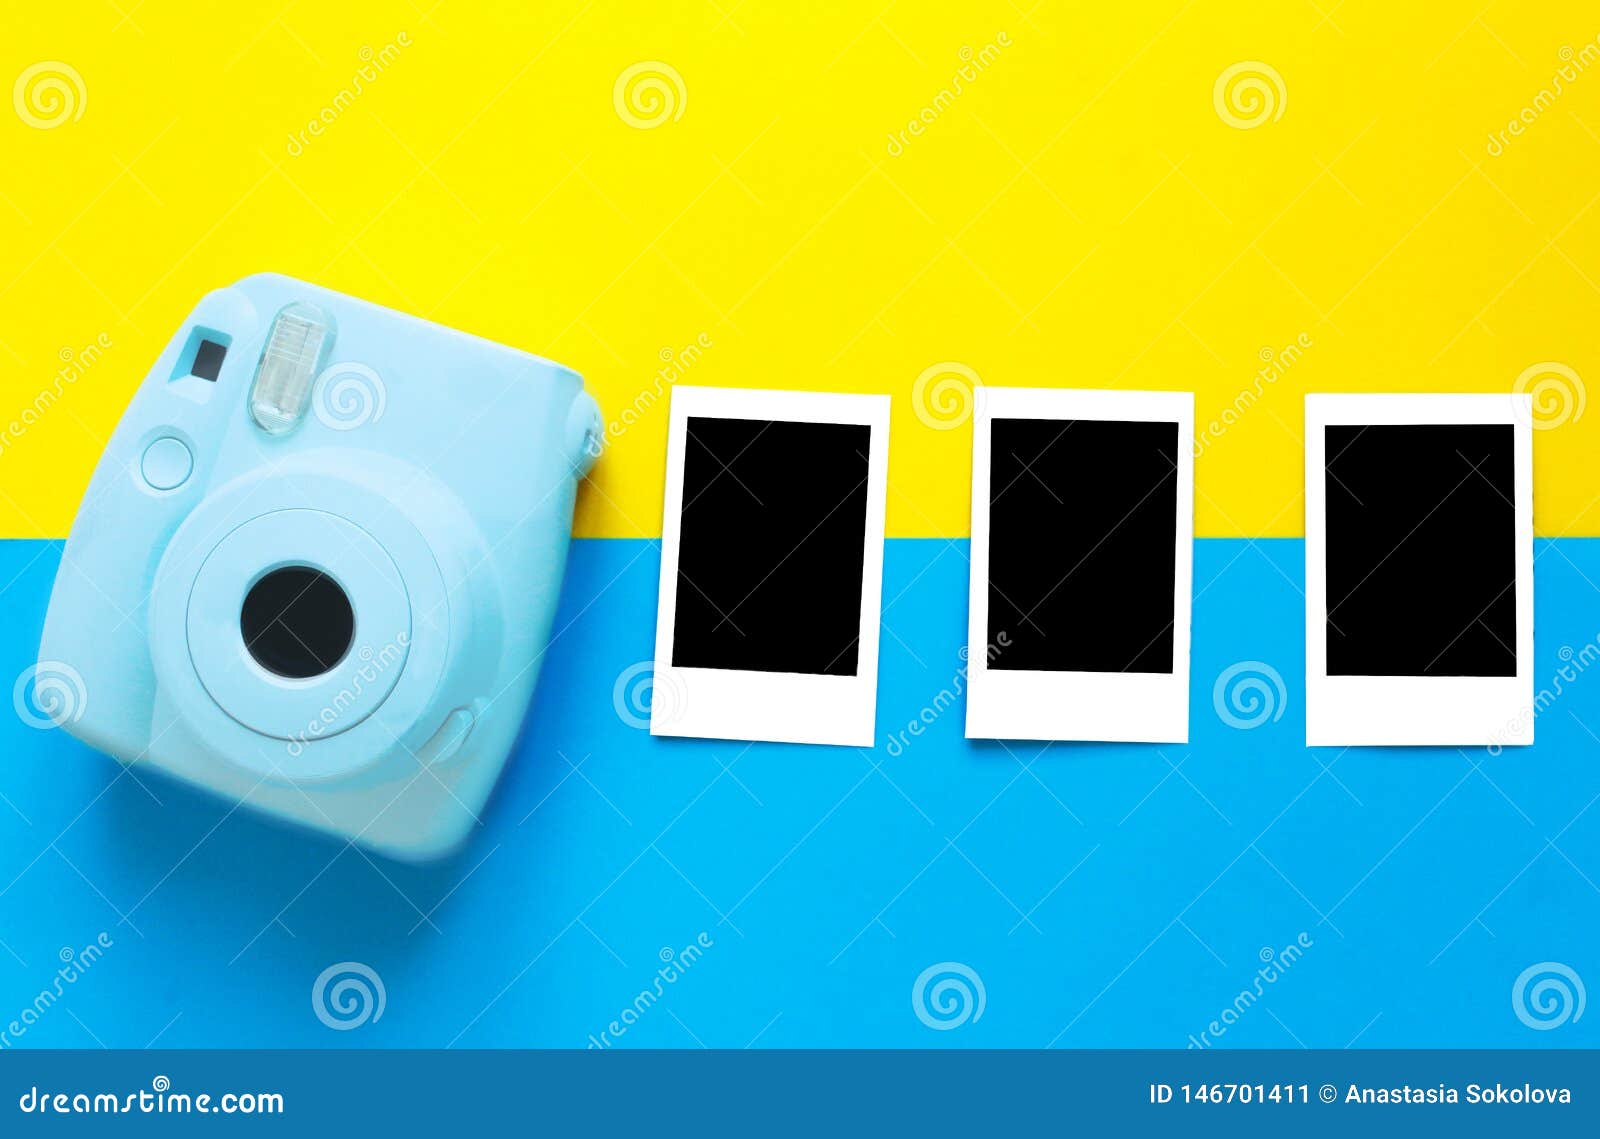 Blue Camera with Blank Picture Frames on Colourful Background ...